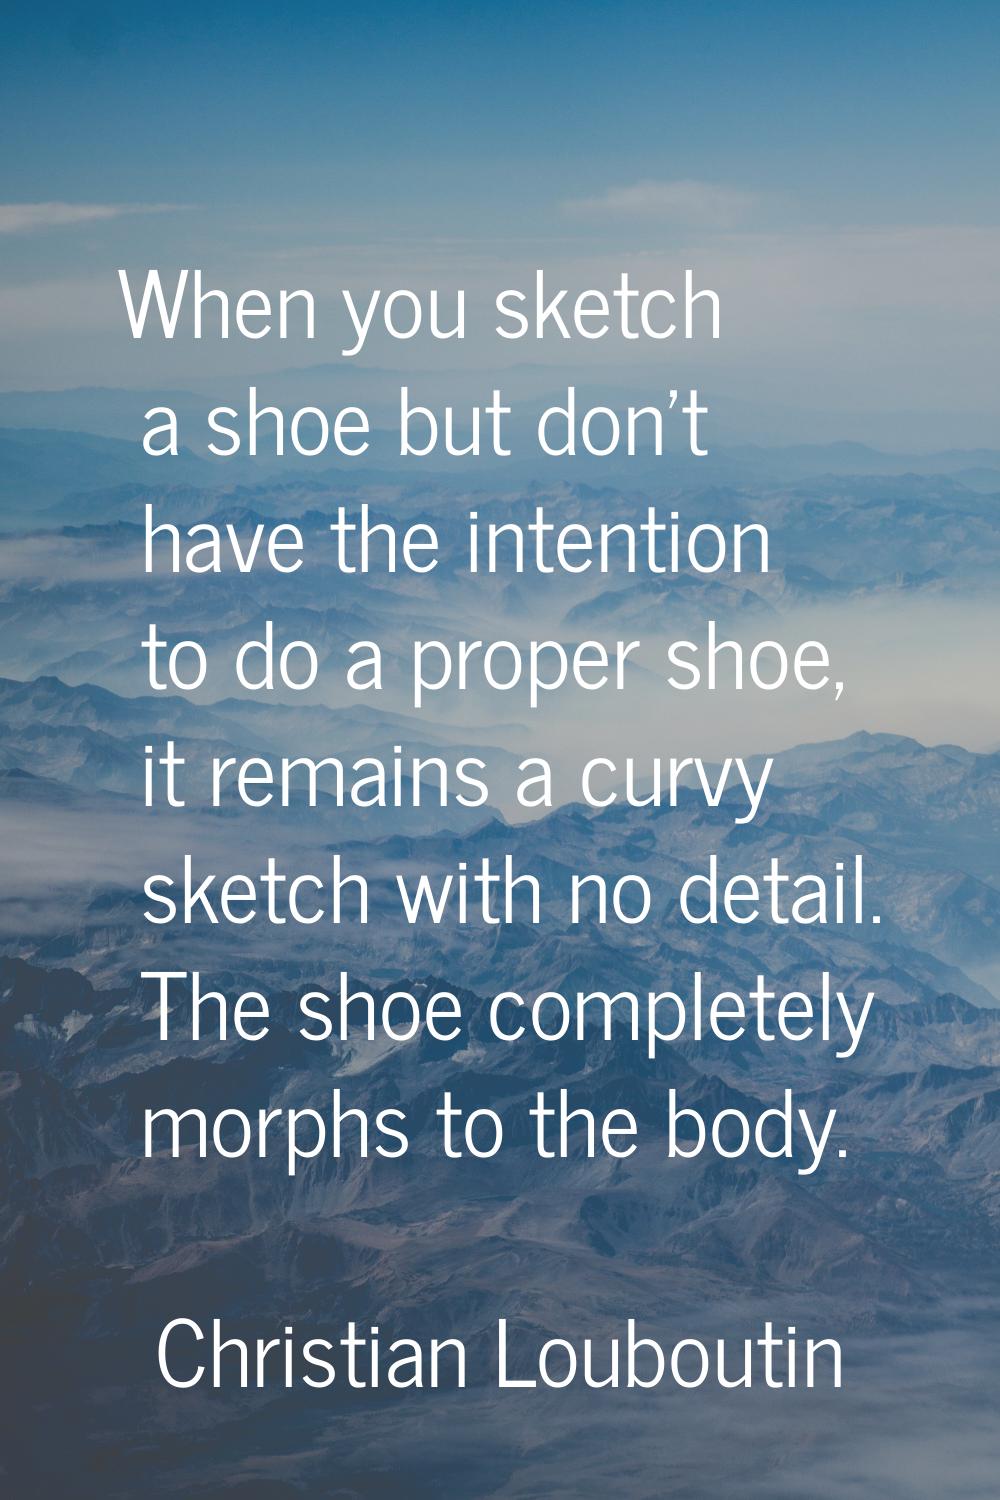 When you sketch a shoe but don't have the intention to do a proper shoe, it remains a curvy sketch 